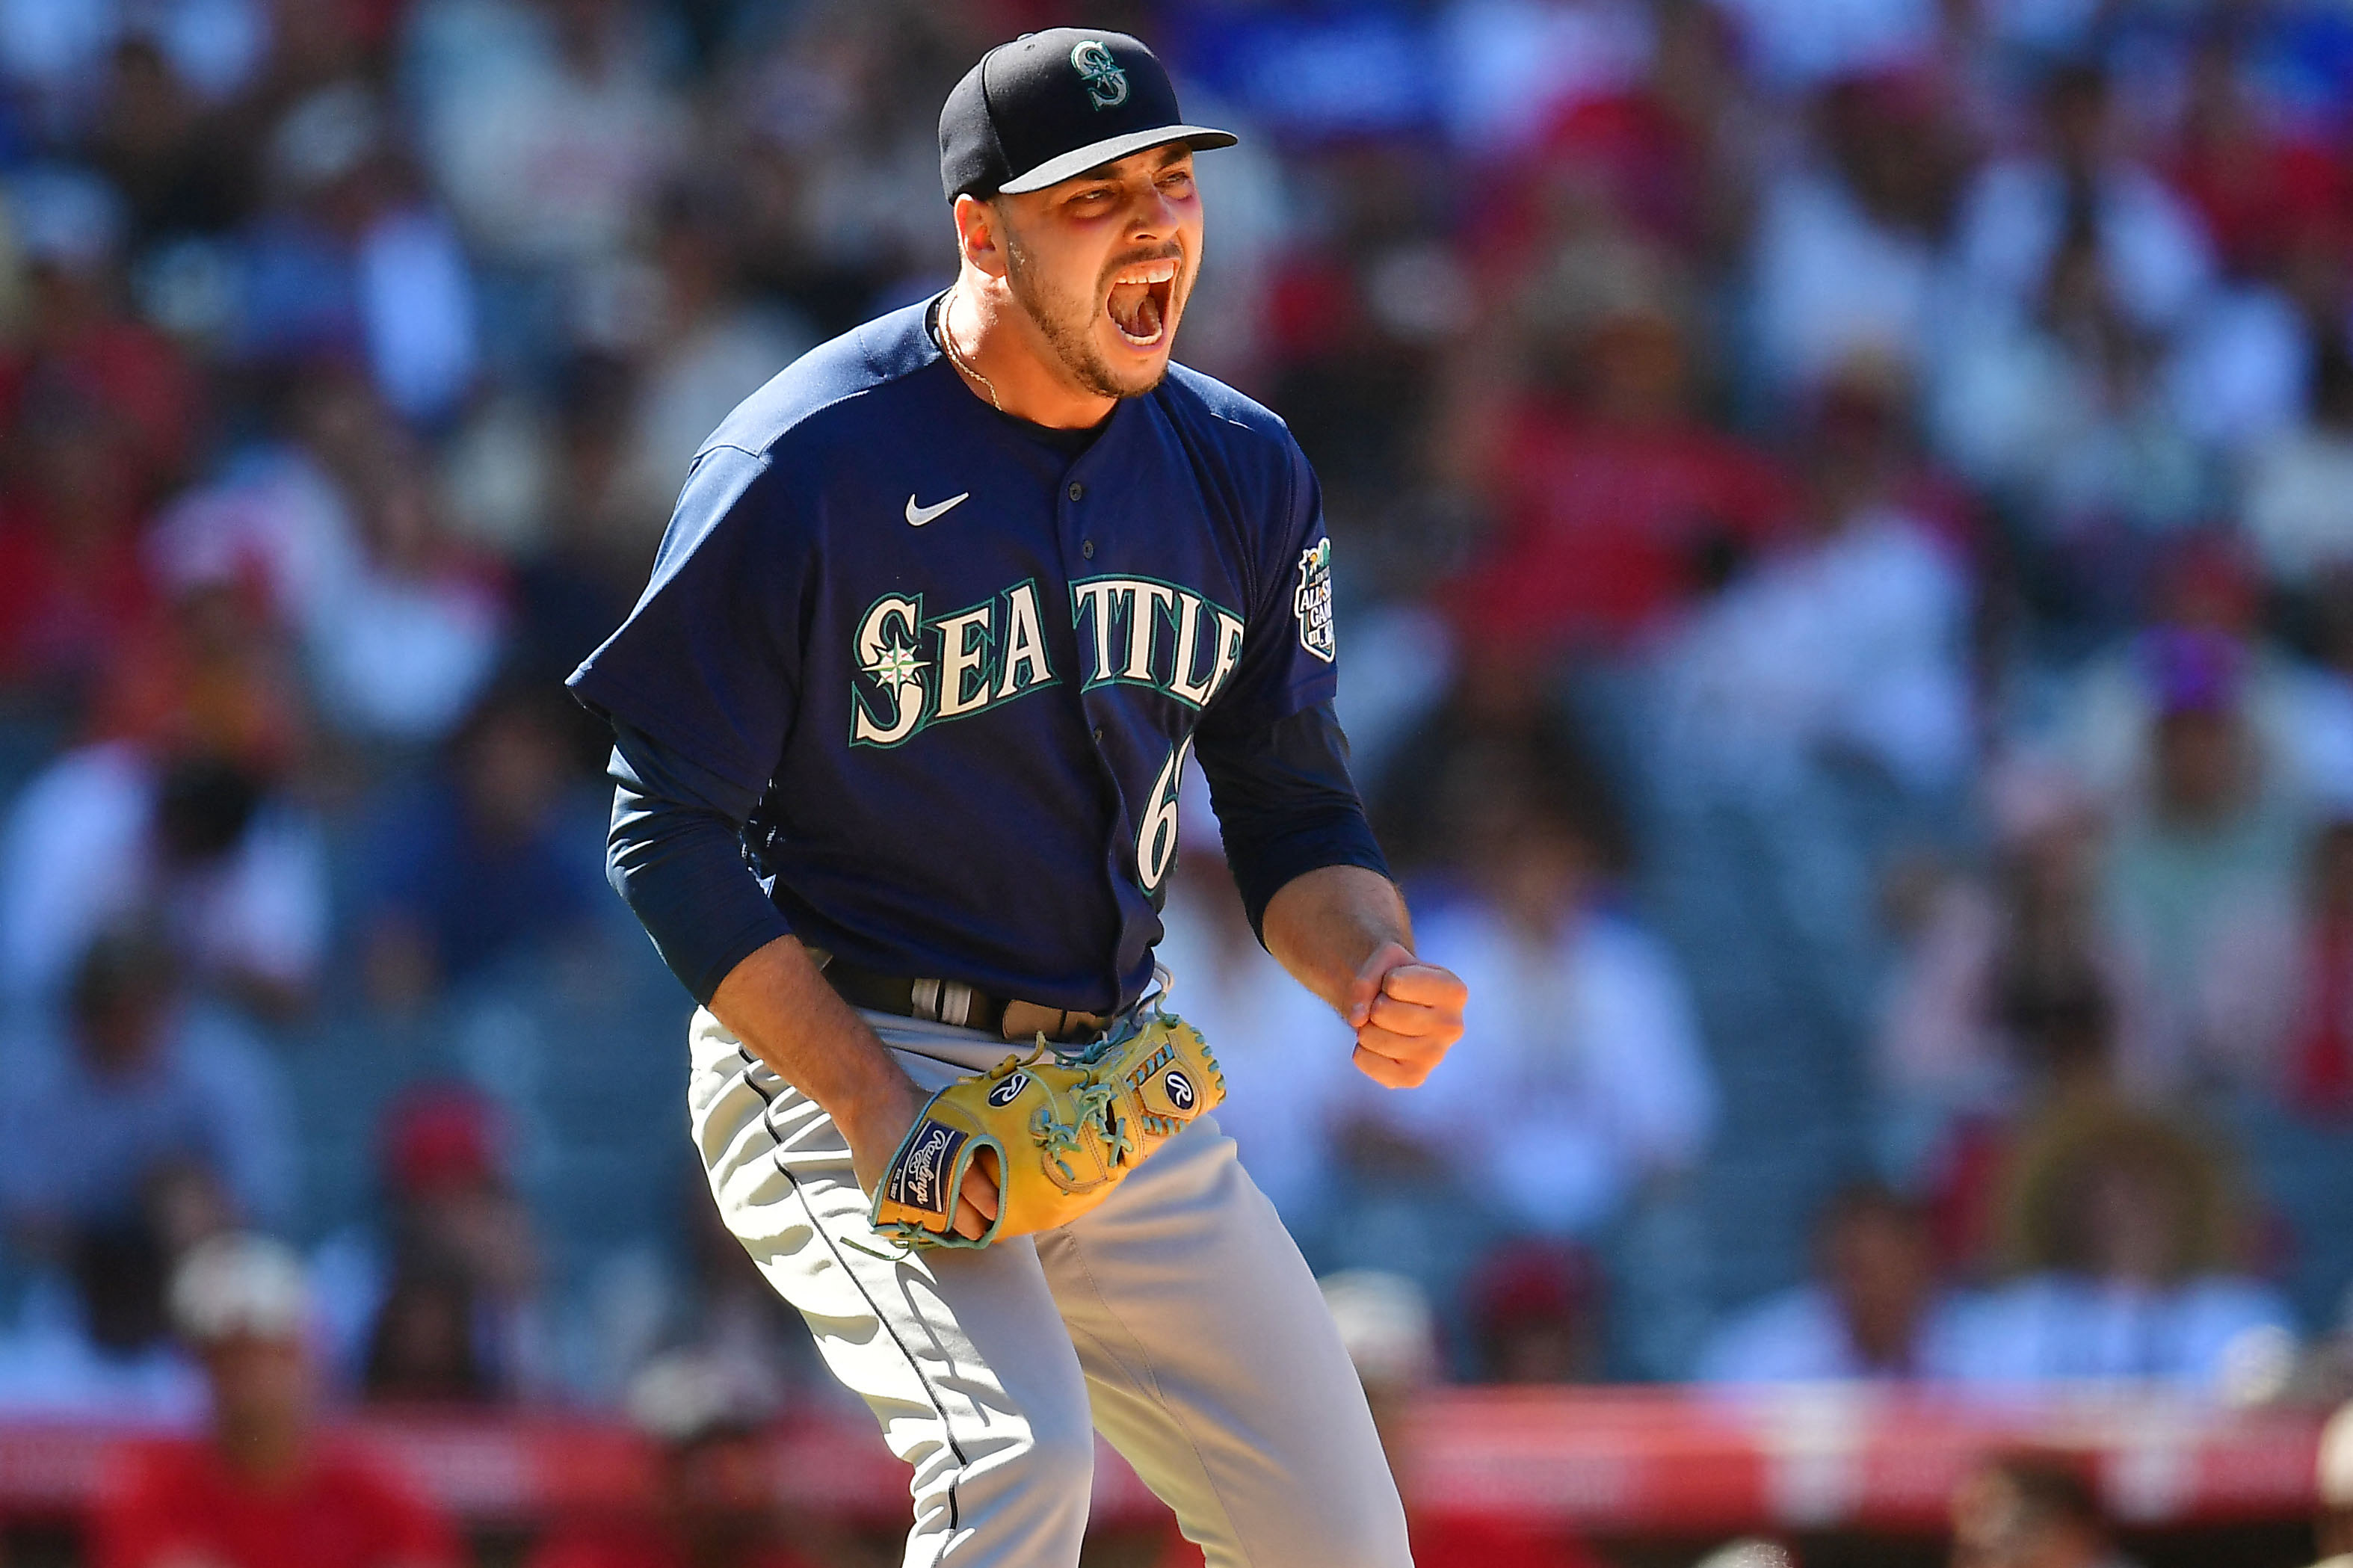 Eugenio Suárez delivers in 10th inning, Mariners sweep Angels with